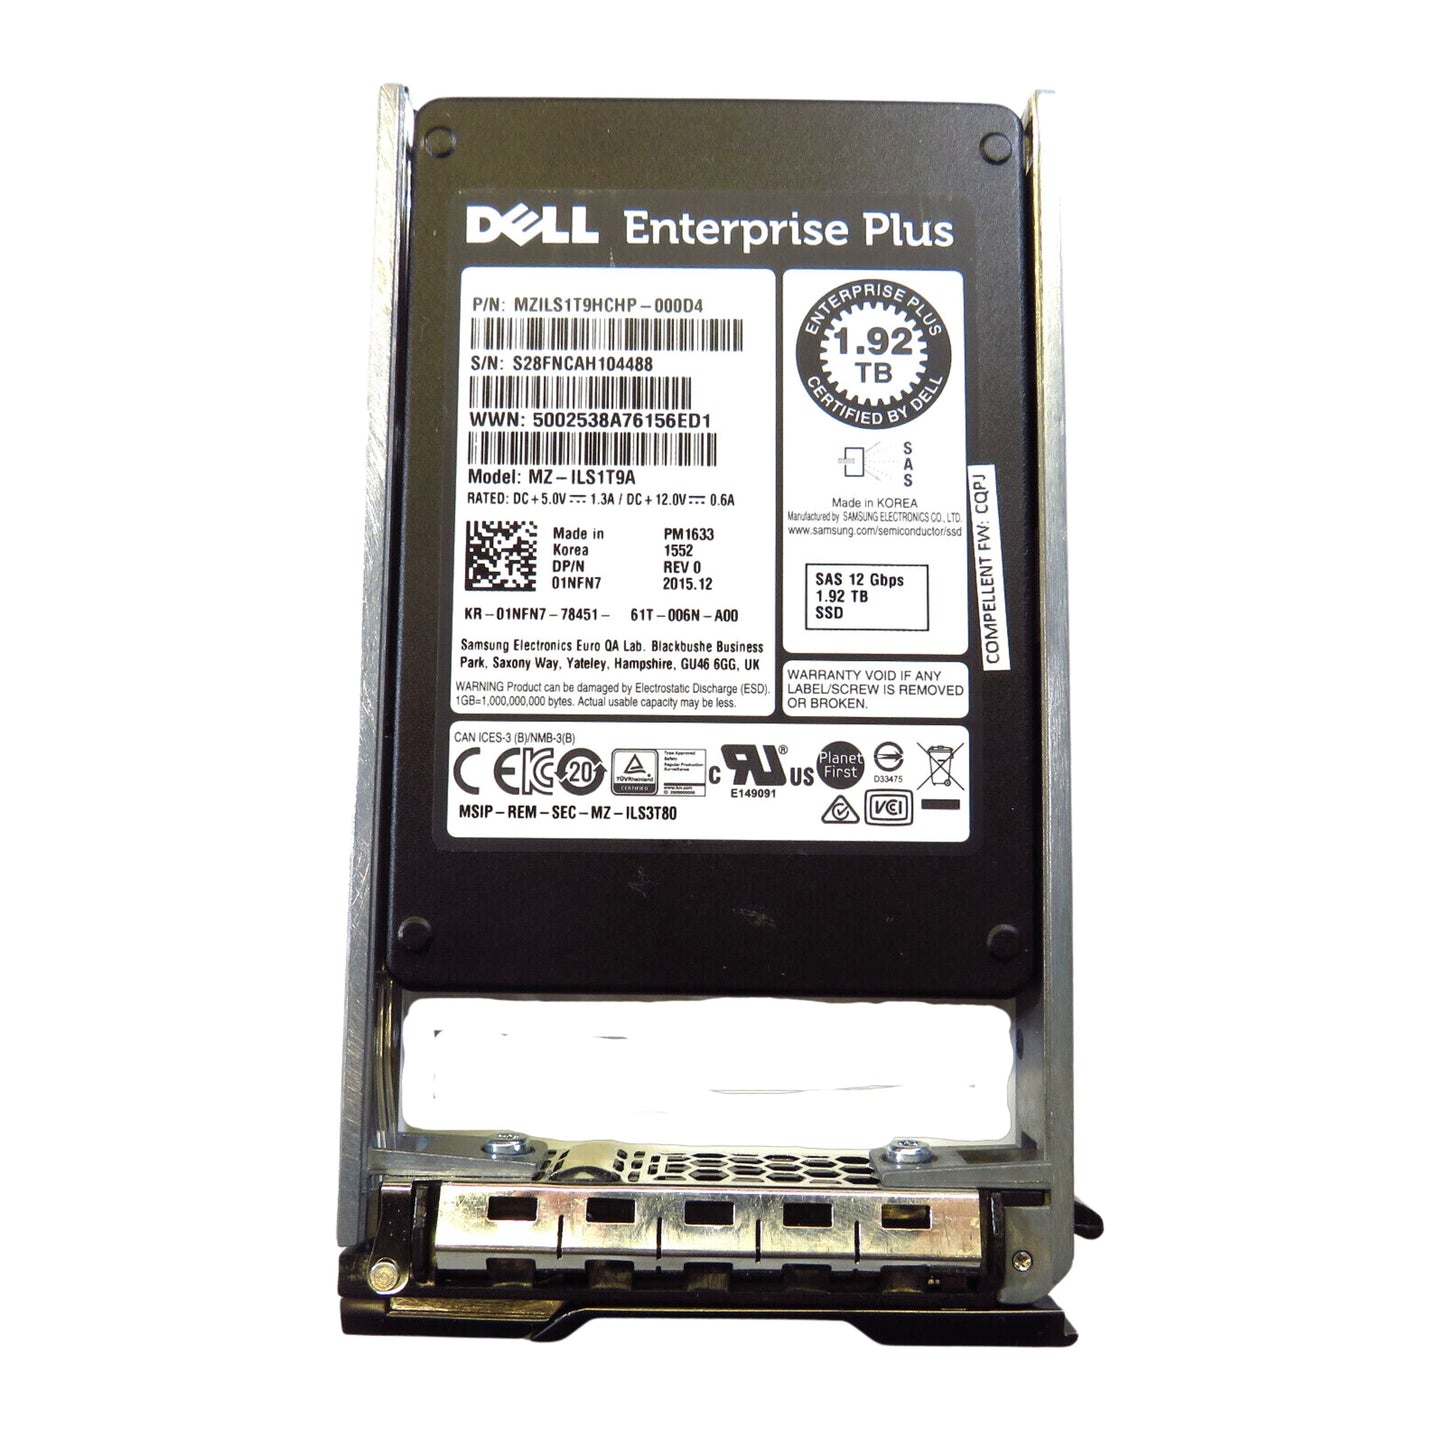 Dell Compellent 1NFN7 1.92TB 2.5" SAS 12Gbps SSD Solid State Drive (Refurbished)